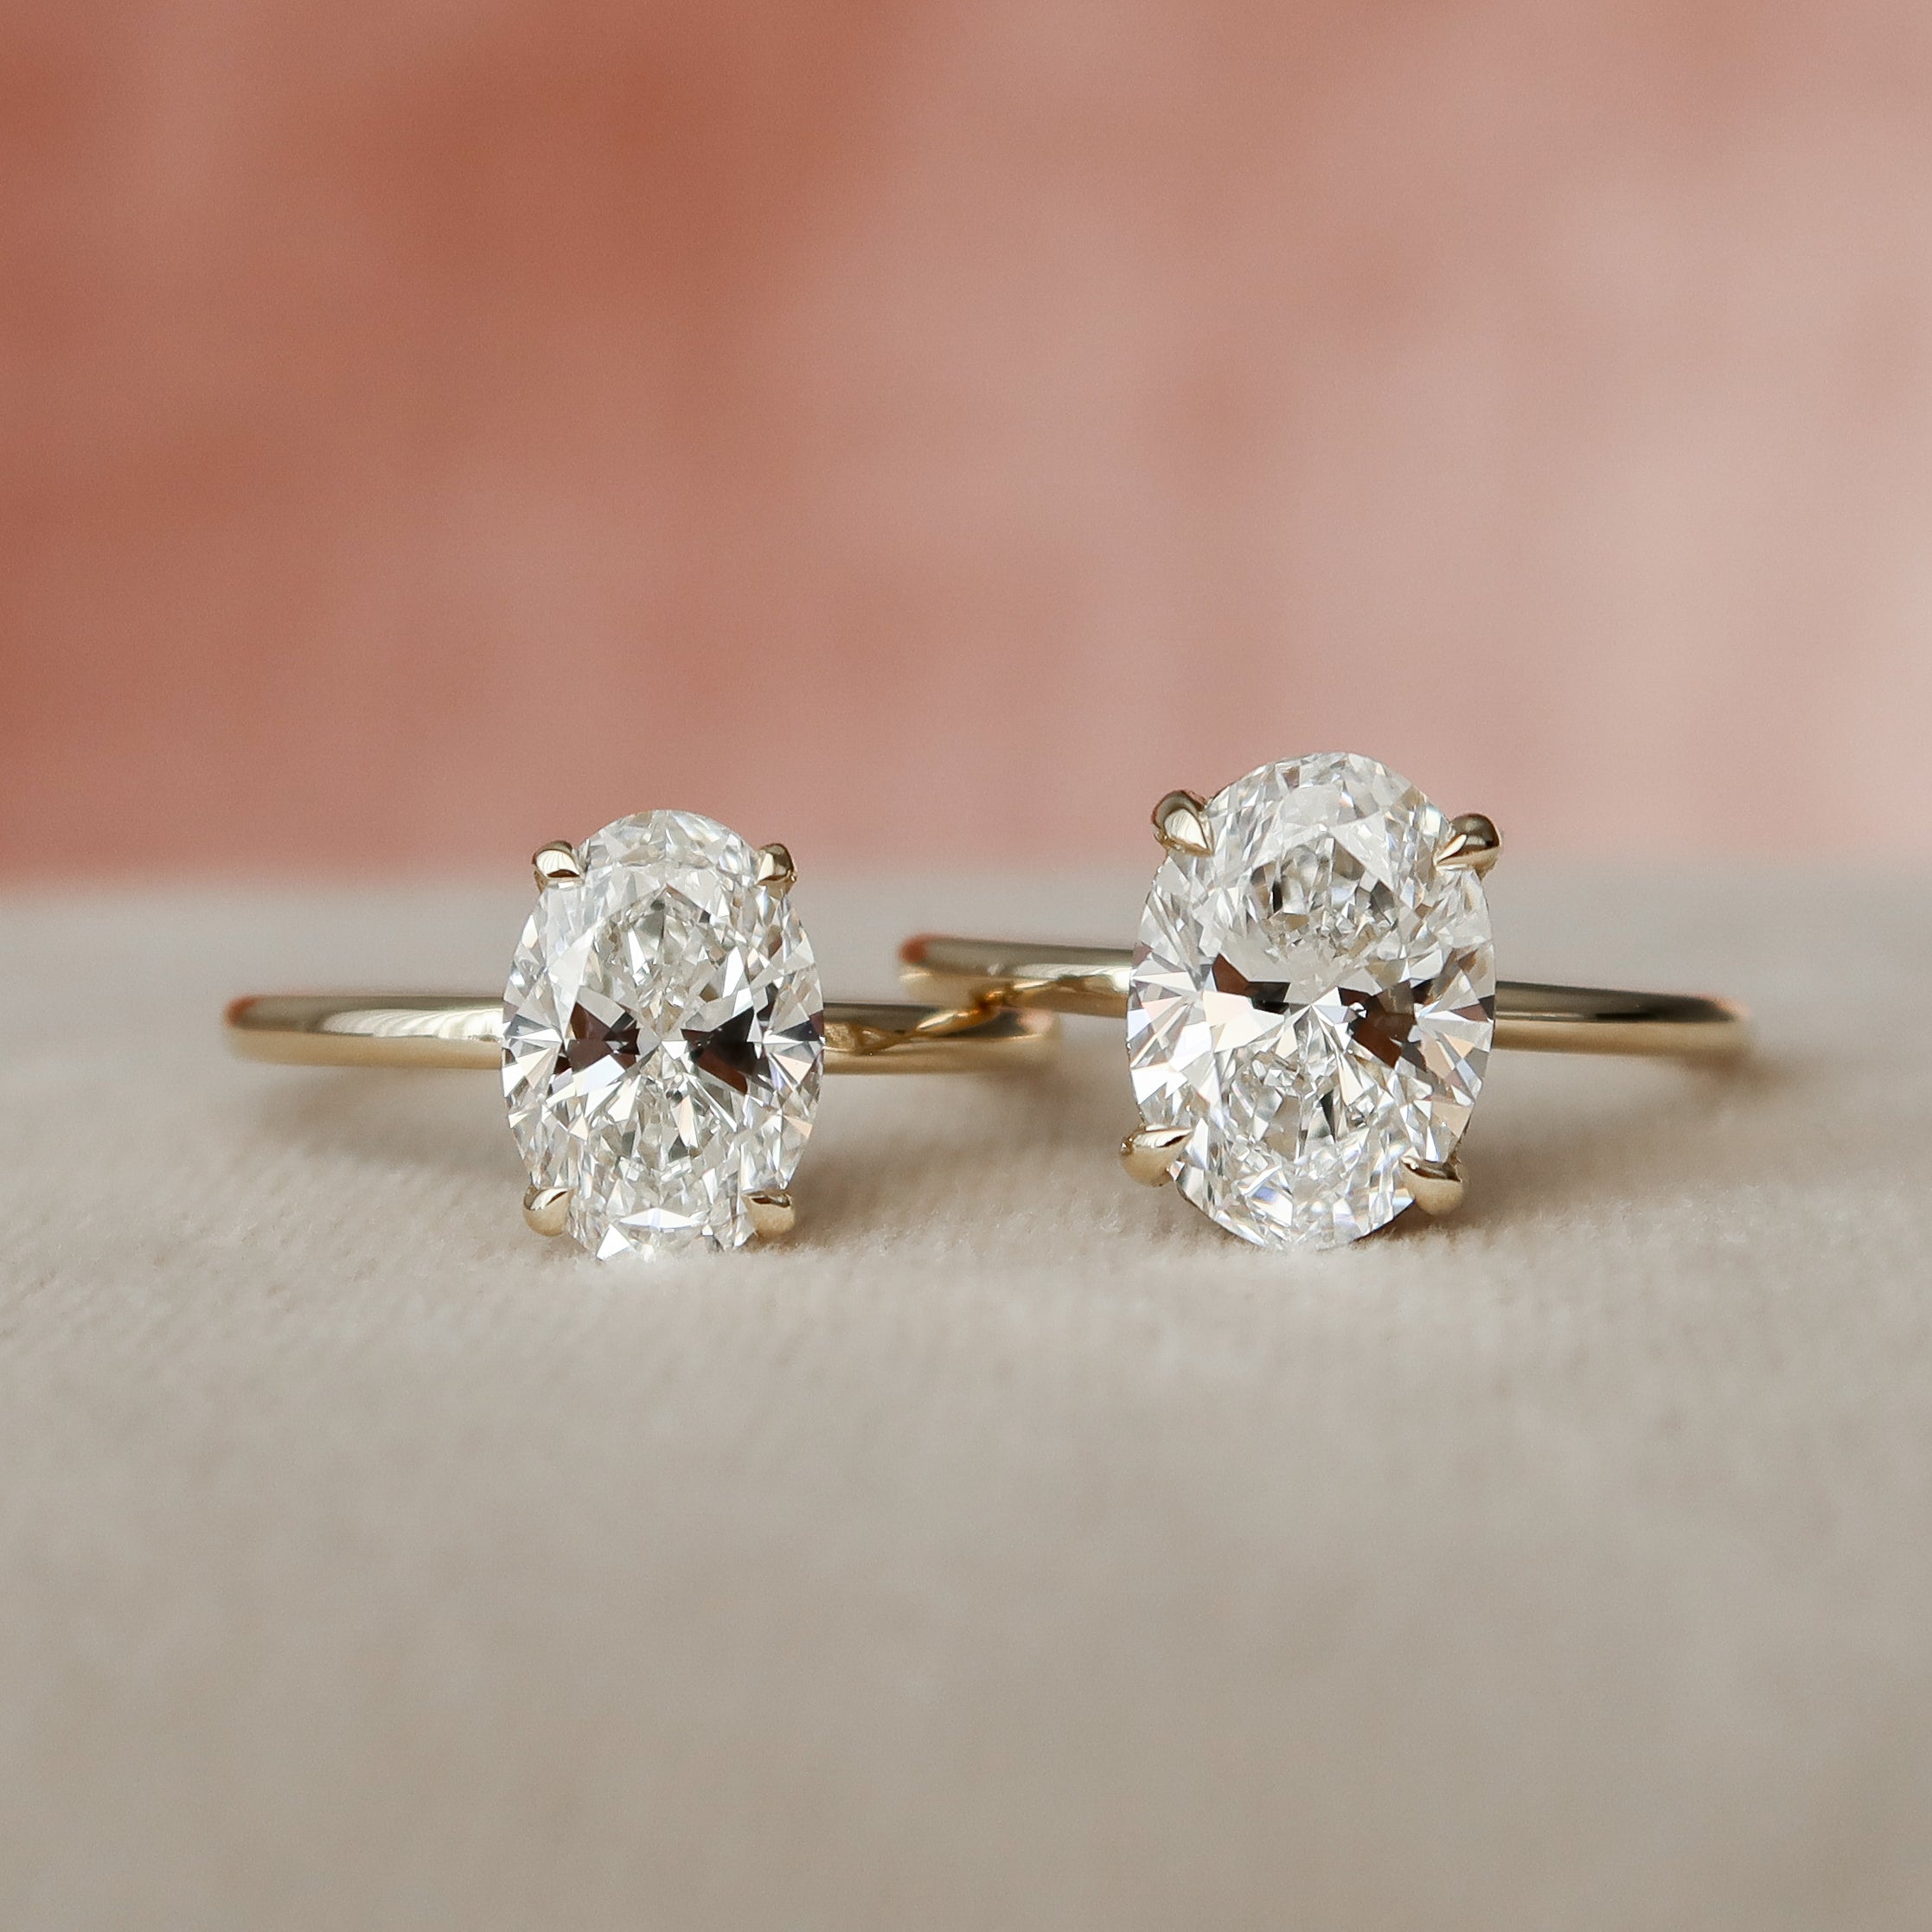 Solitaire Engagement Ring Trends for 2023